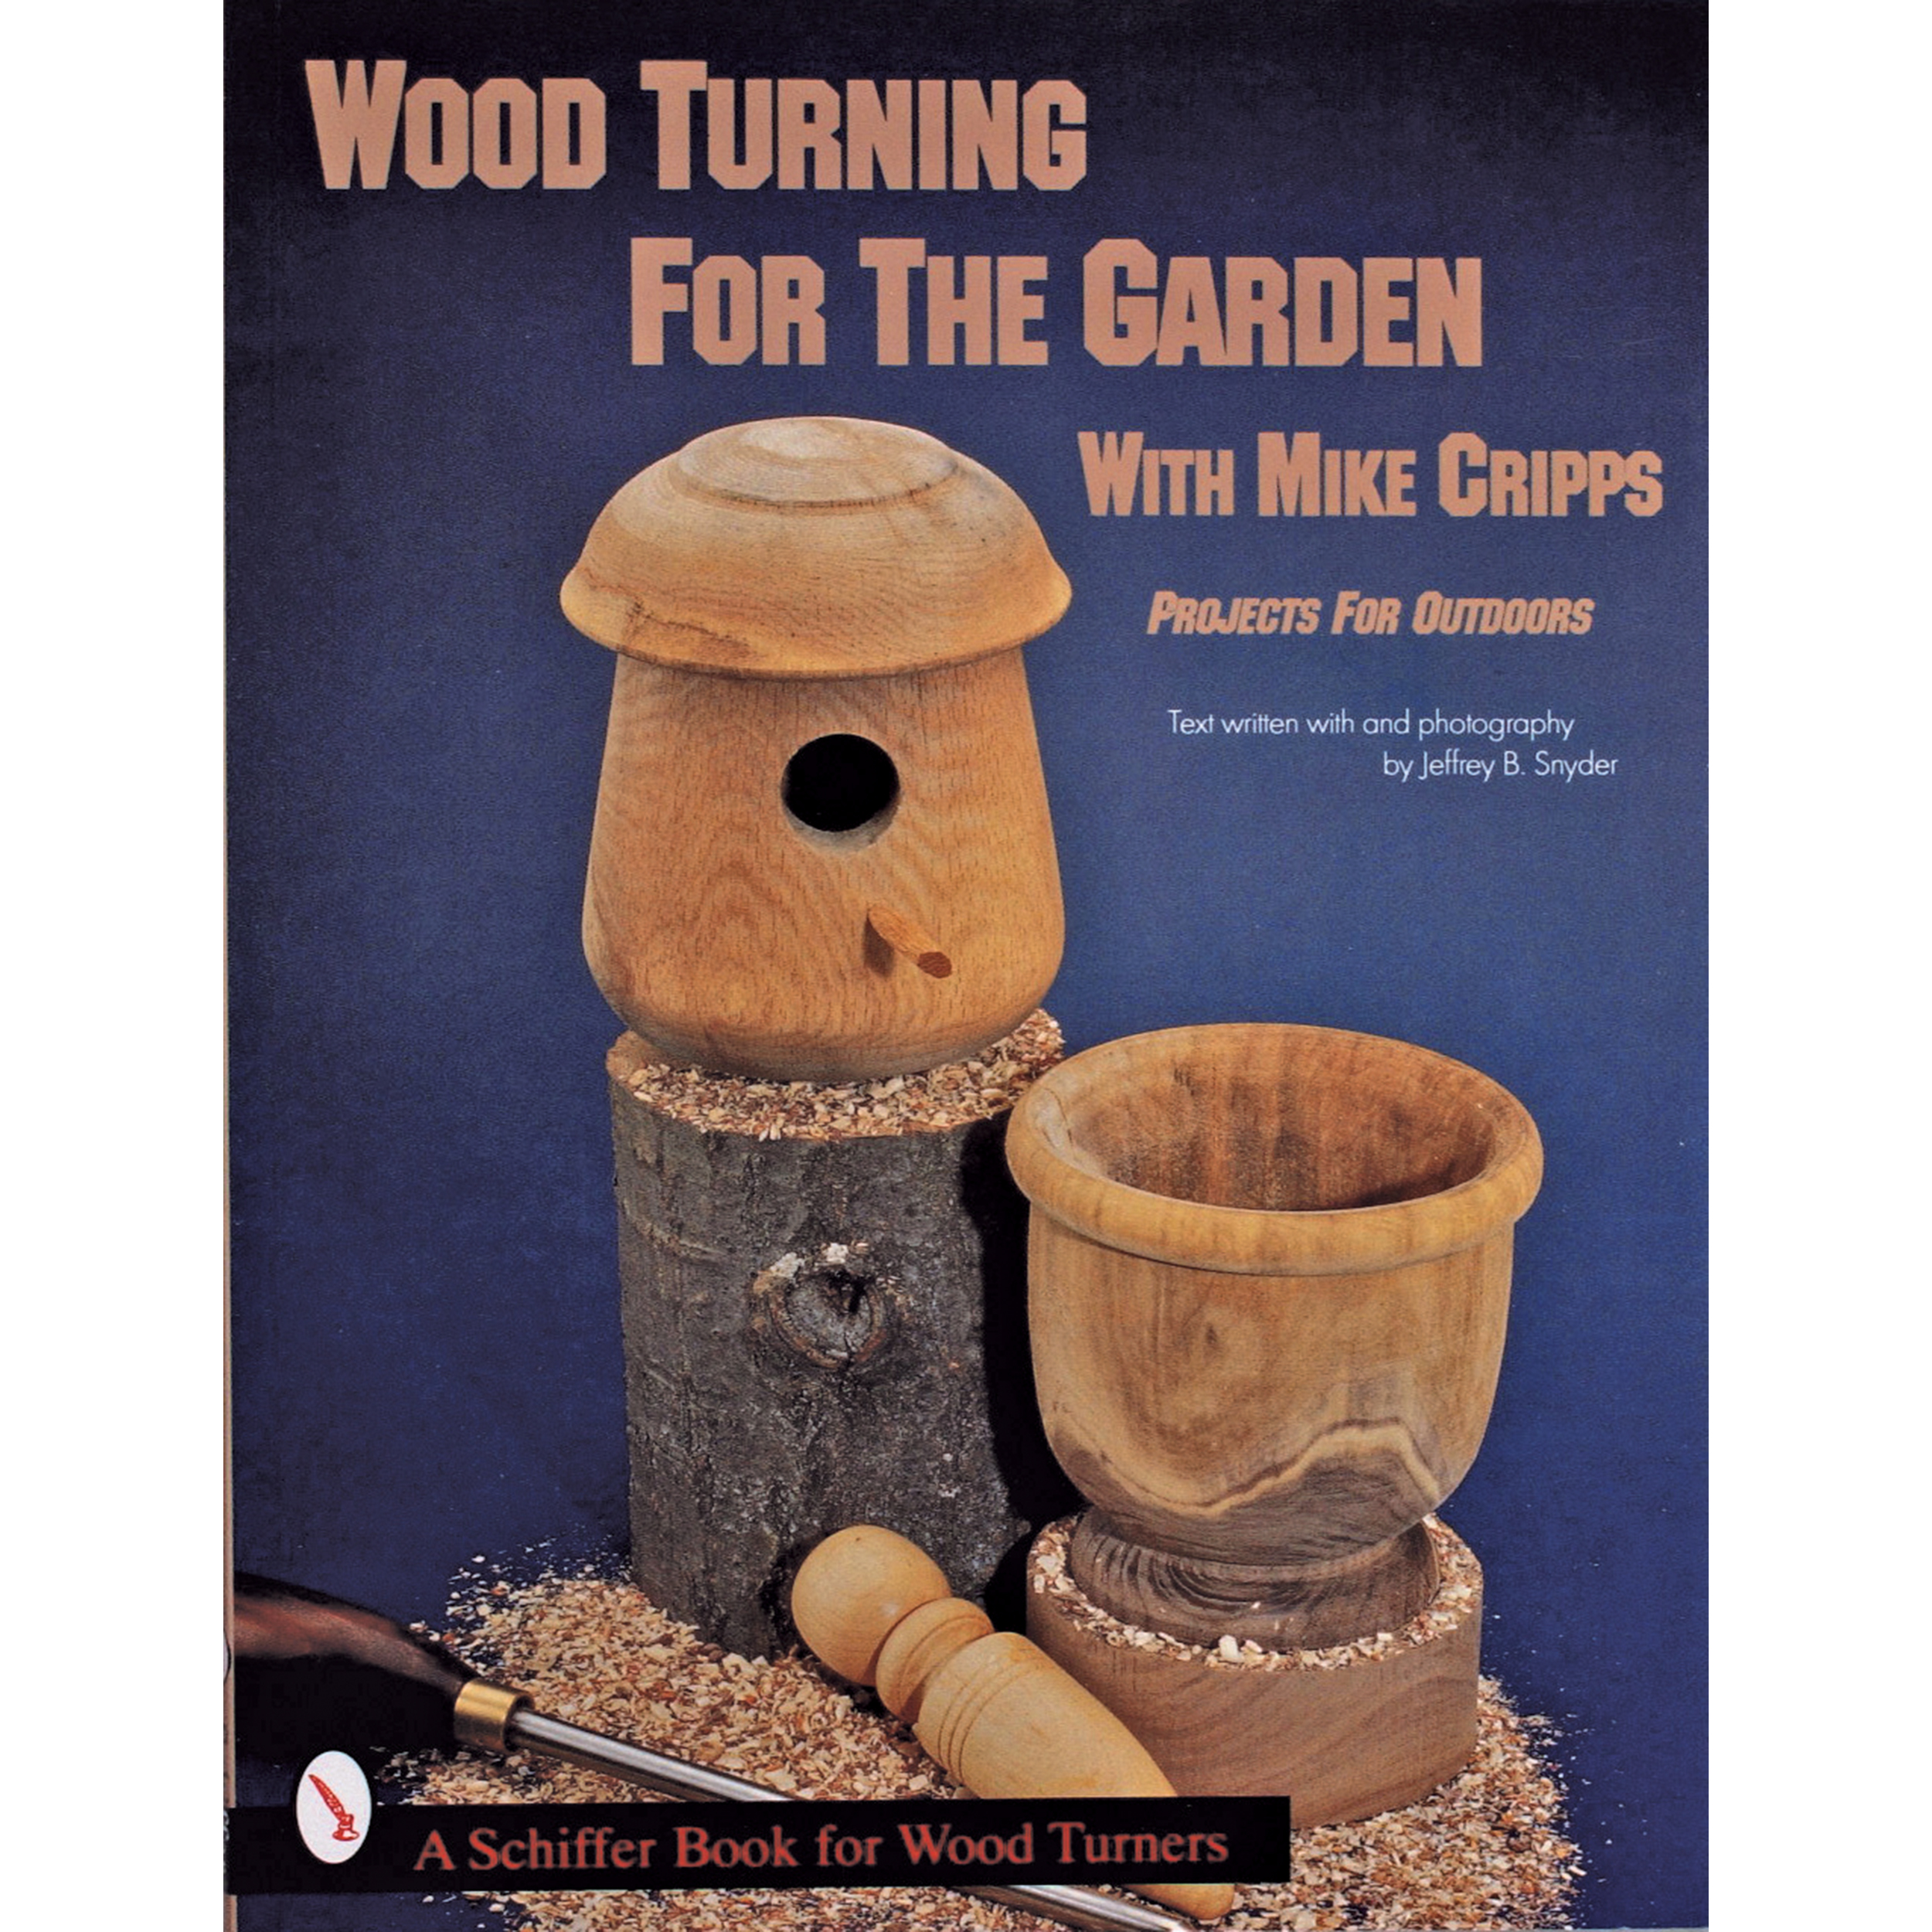 Wood Turning For The Garden